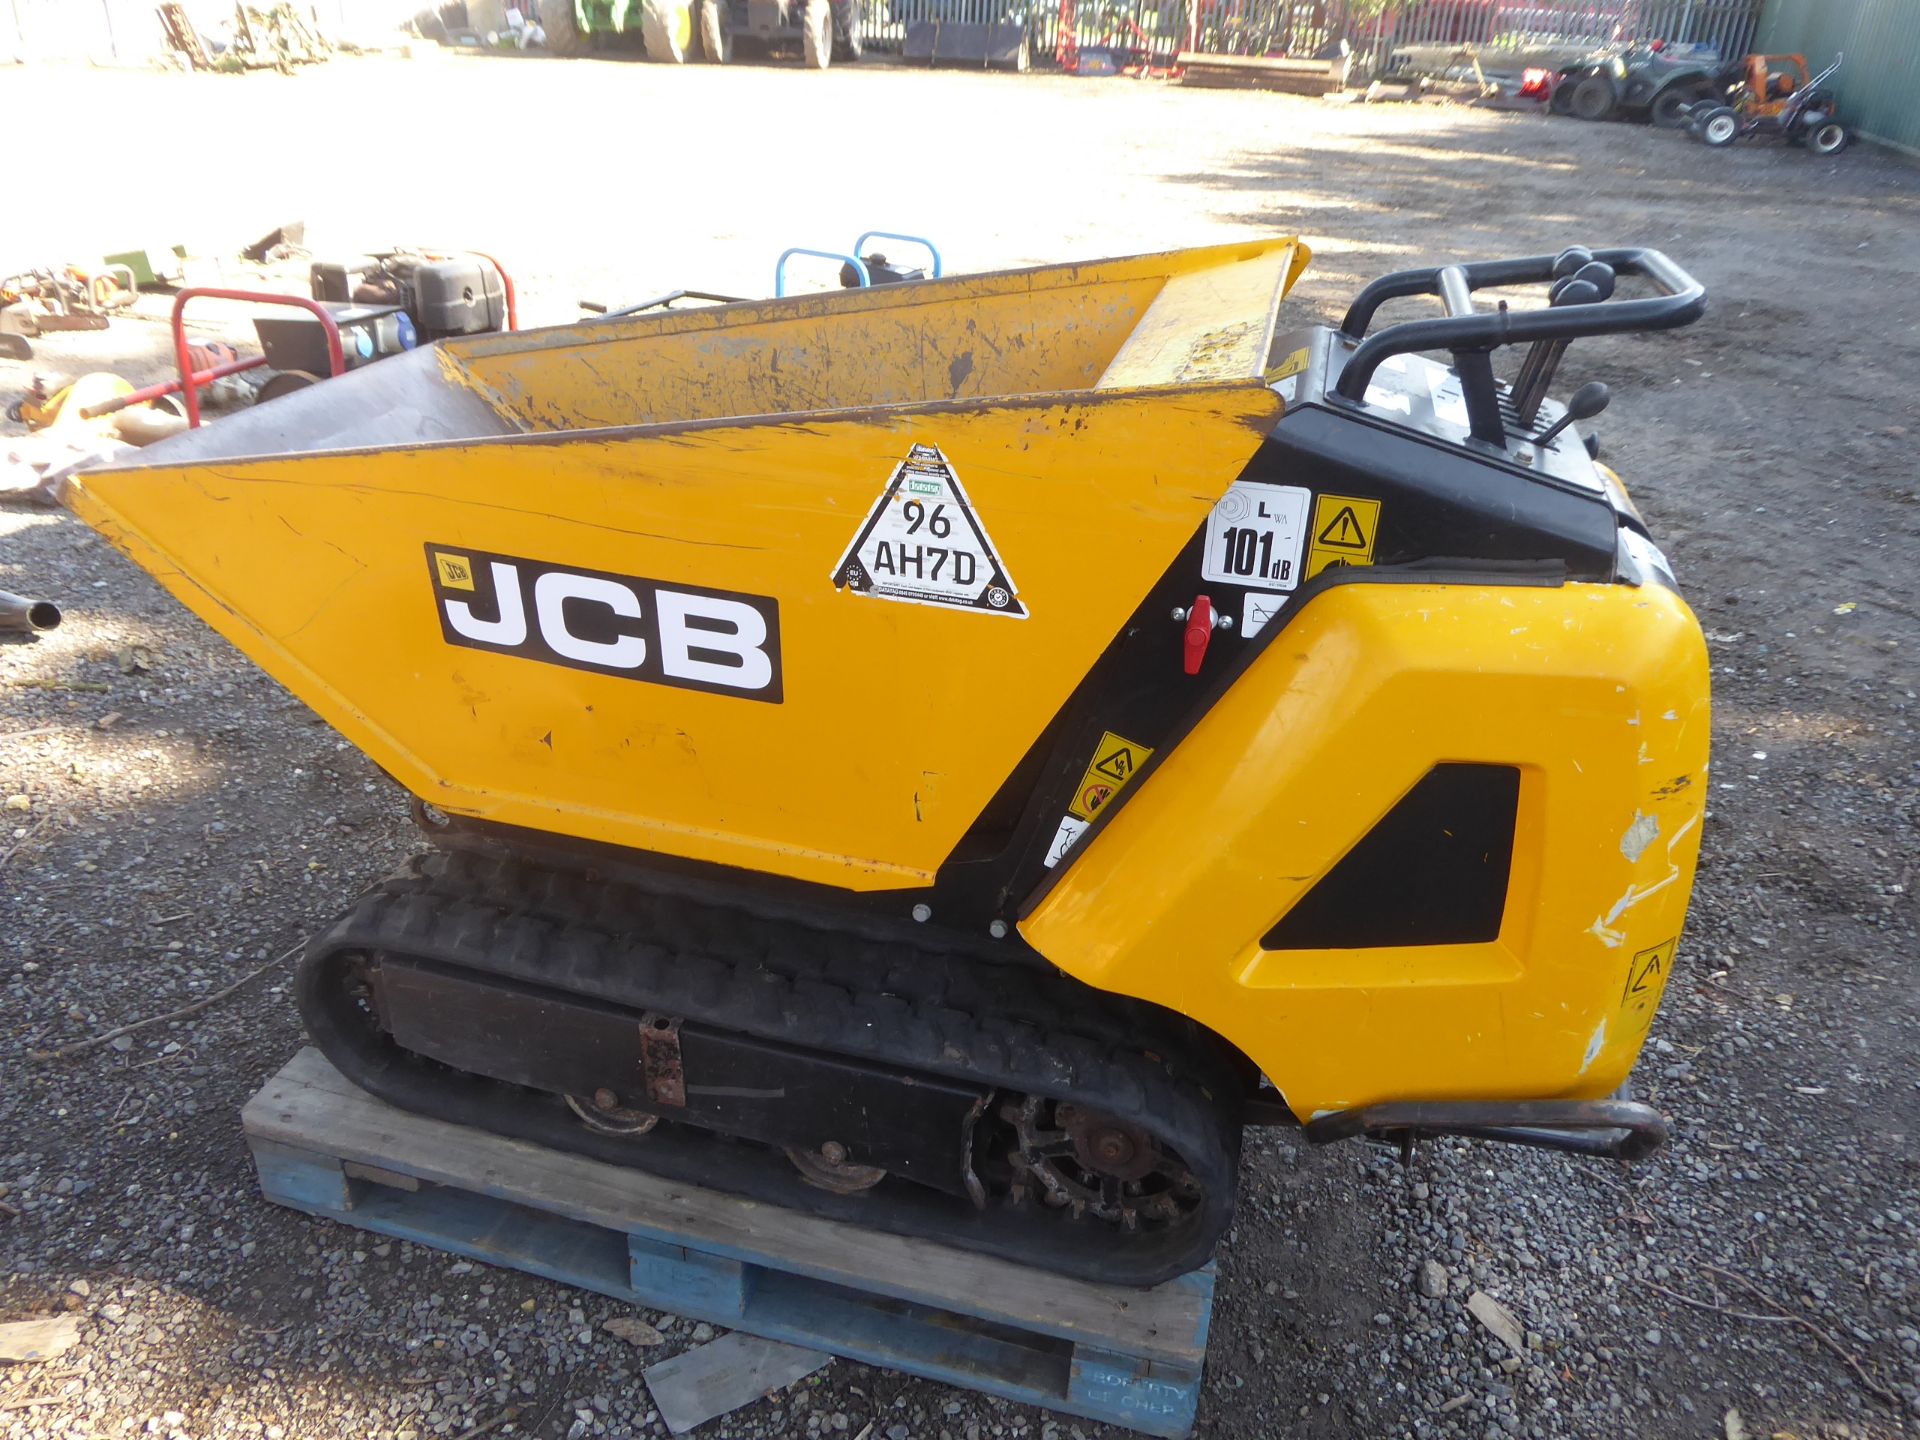 JCB HTD5 tracked dumper, recently serviced, gwo - Image 3 of 3